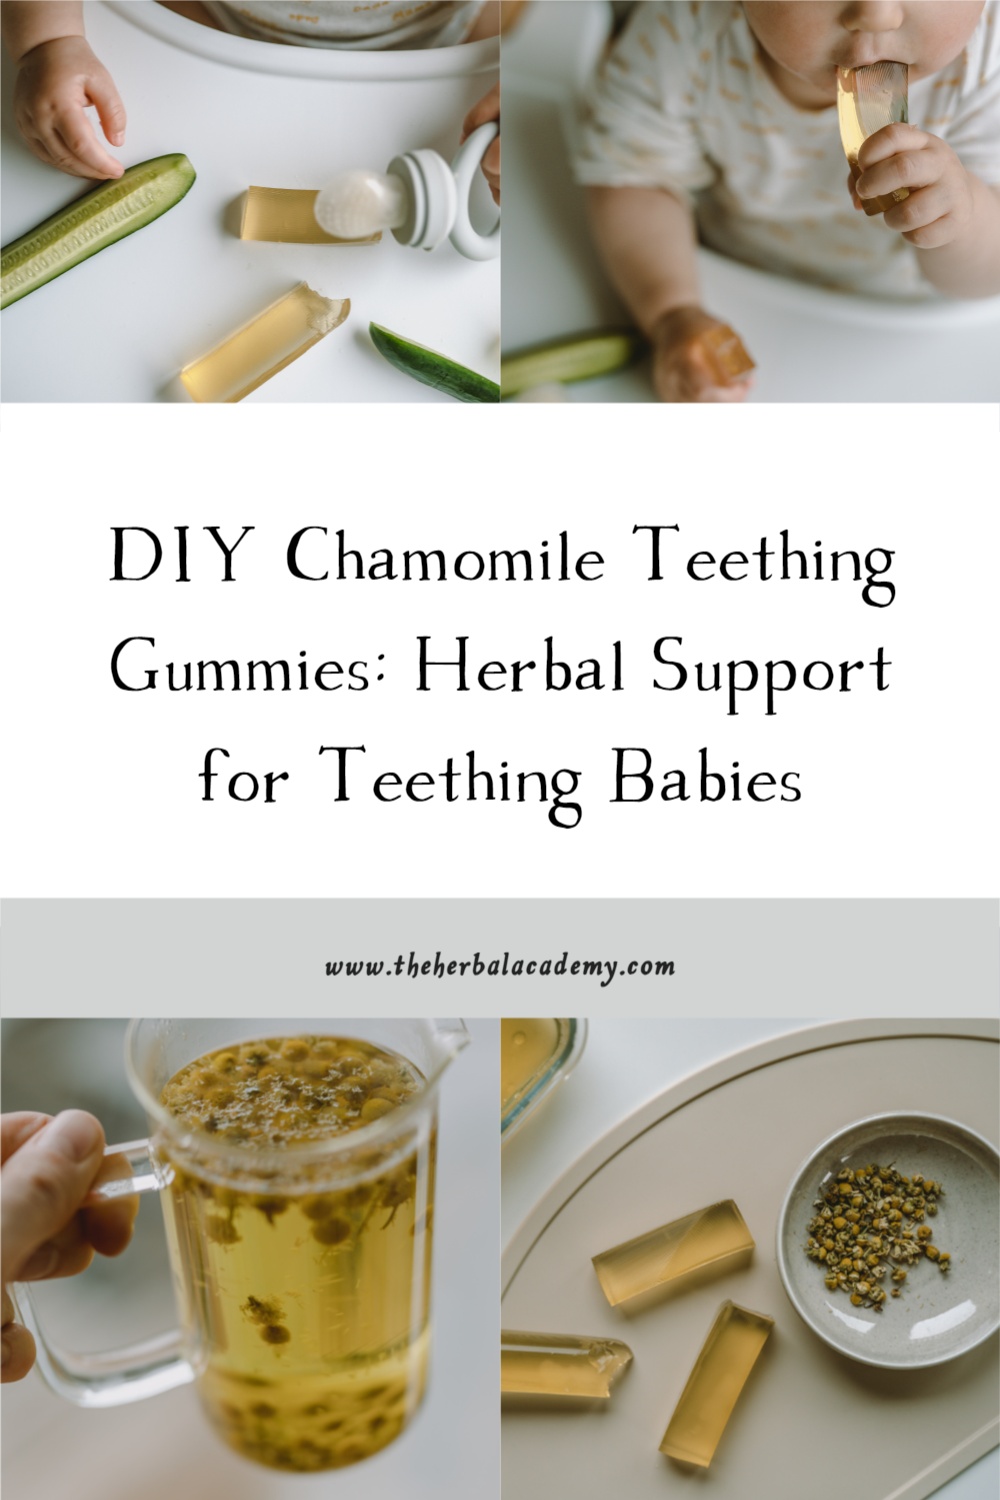 DIY Chamomile Teething Gummies: Herbal Support for Teething Babies | Herbal Academy | In this article, you will find a natural approach to soothe the discomfort of teething with these DIY Chamomile Teething Gummies!